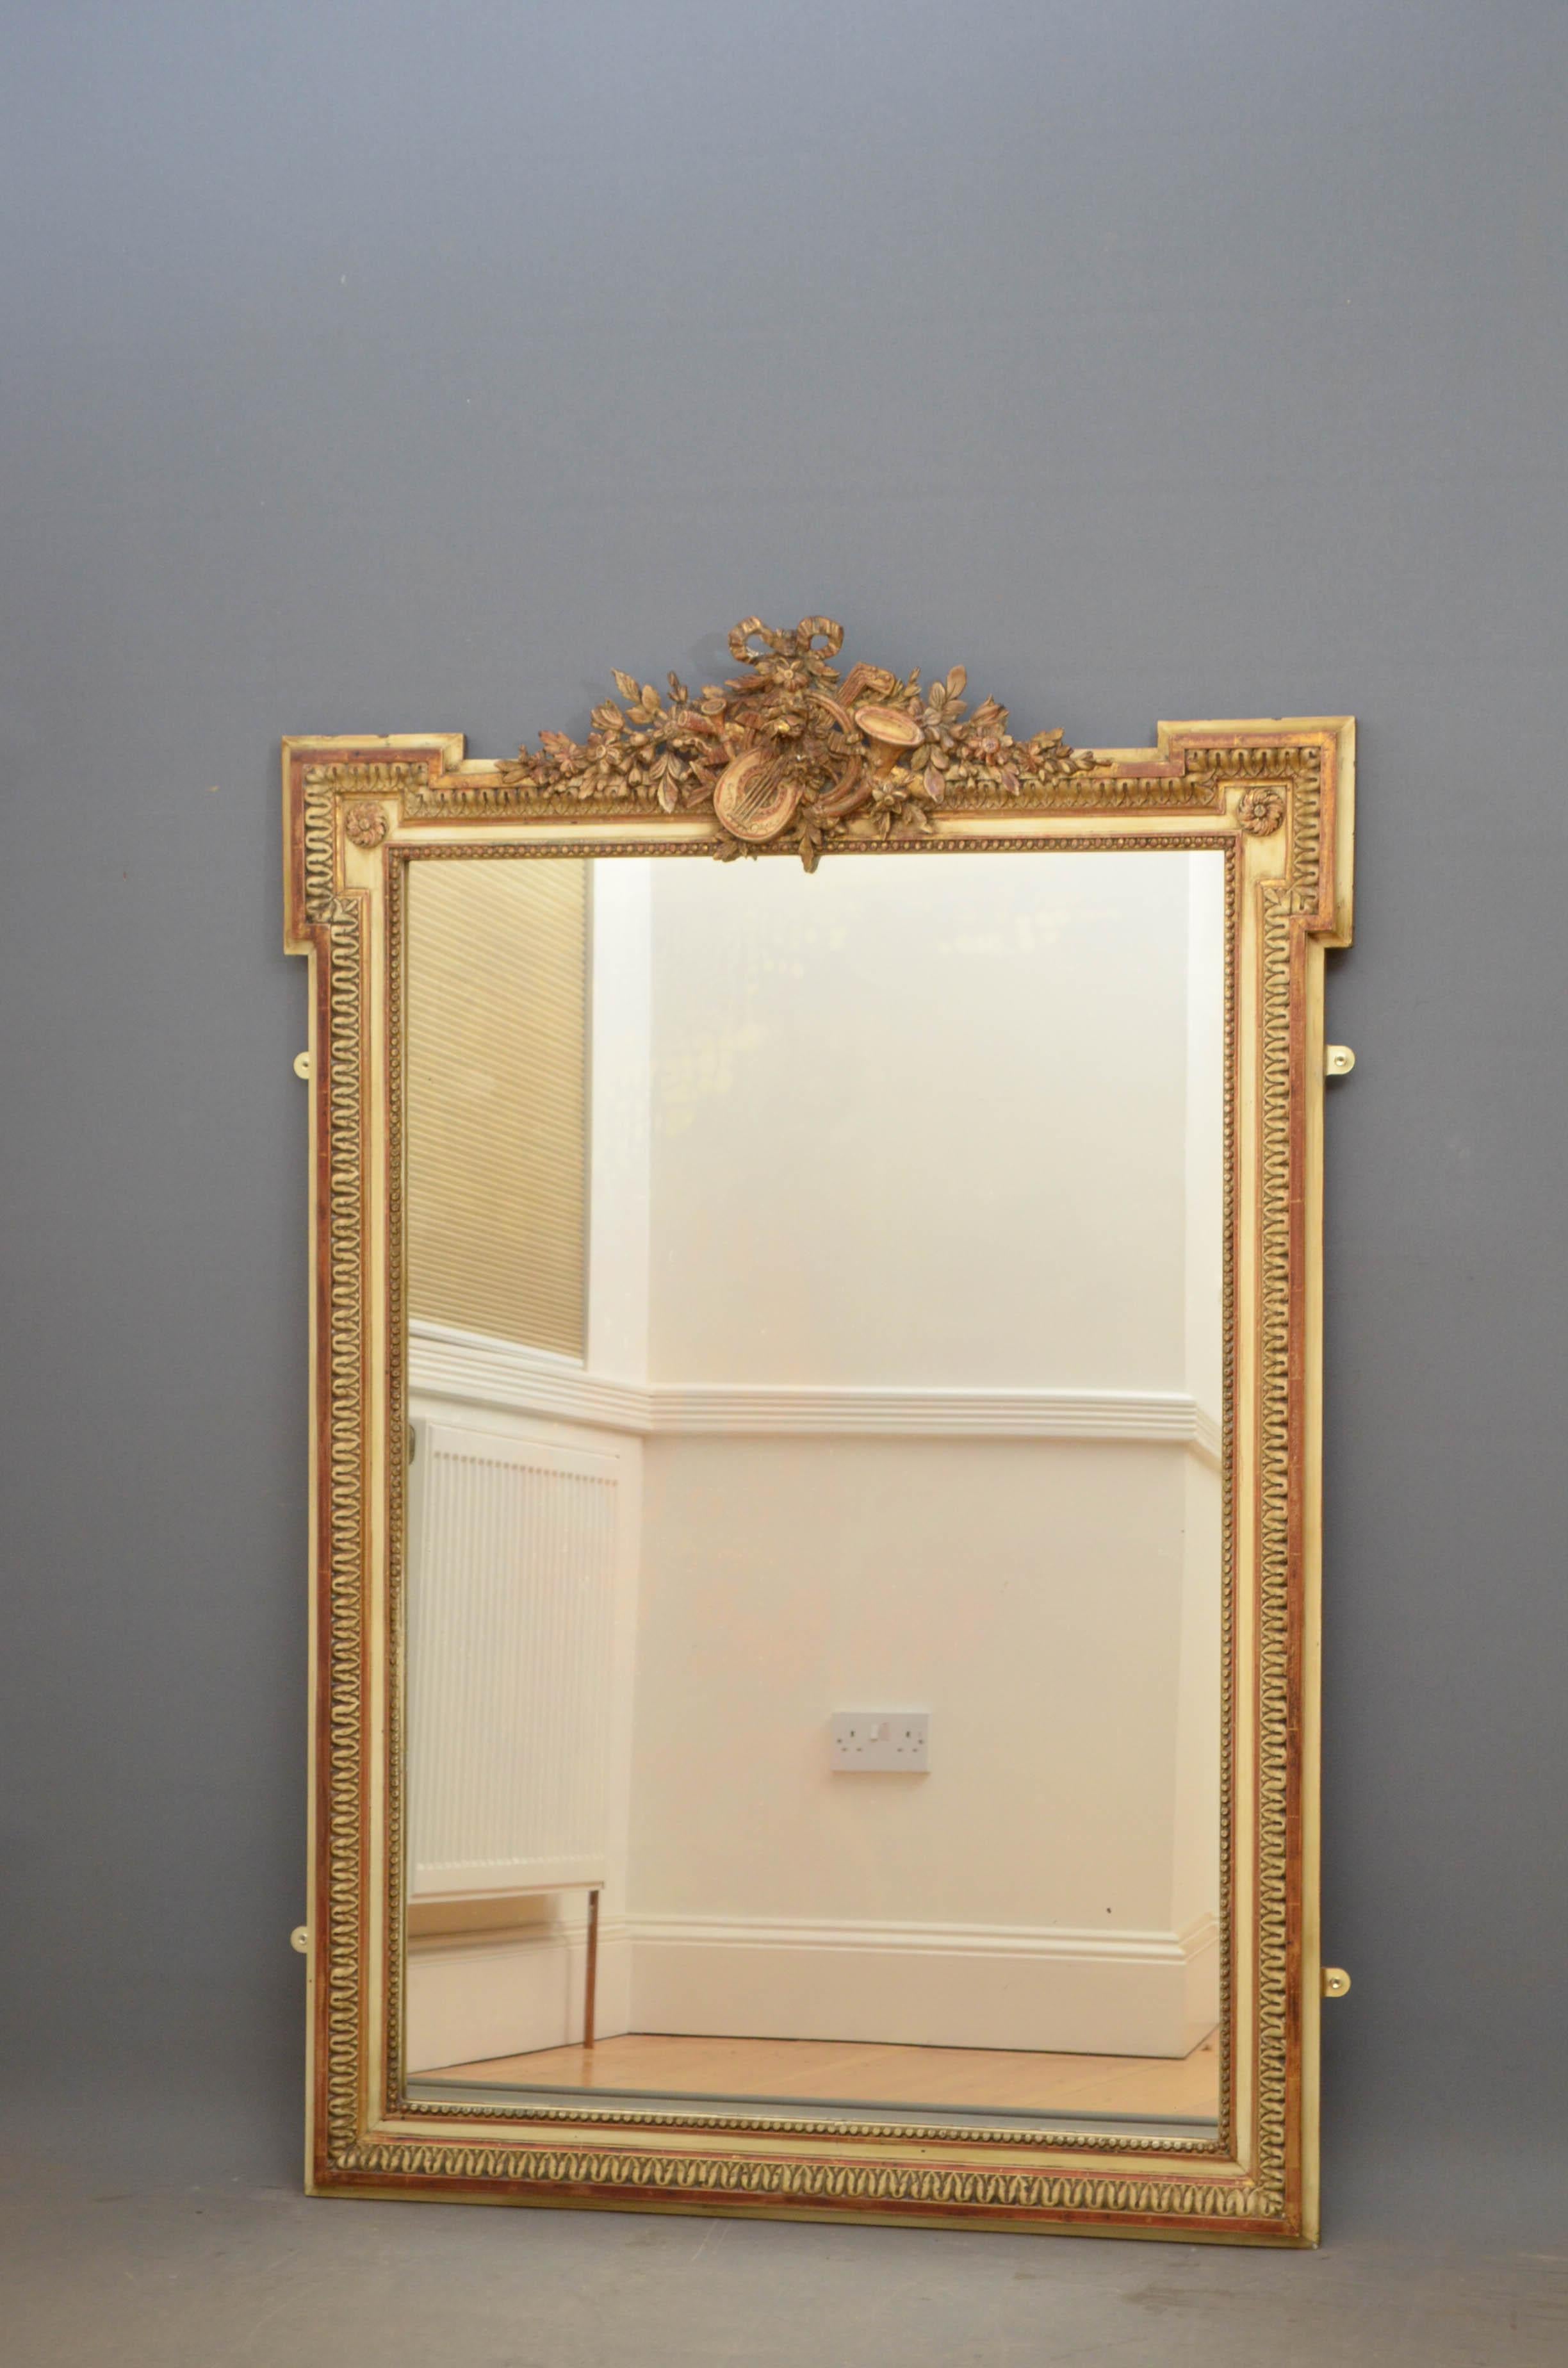 Sn4762 stylish turn of the century mirror with original glass with some foxing in moulded and carved frame. This antique mirror retains its original glass and parts of gilt, all in excellent home ready condition, circa 1900.
Measures: H 59